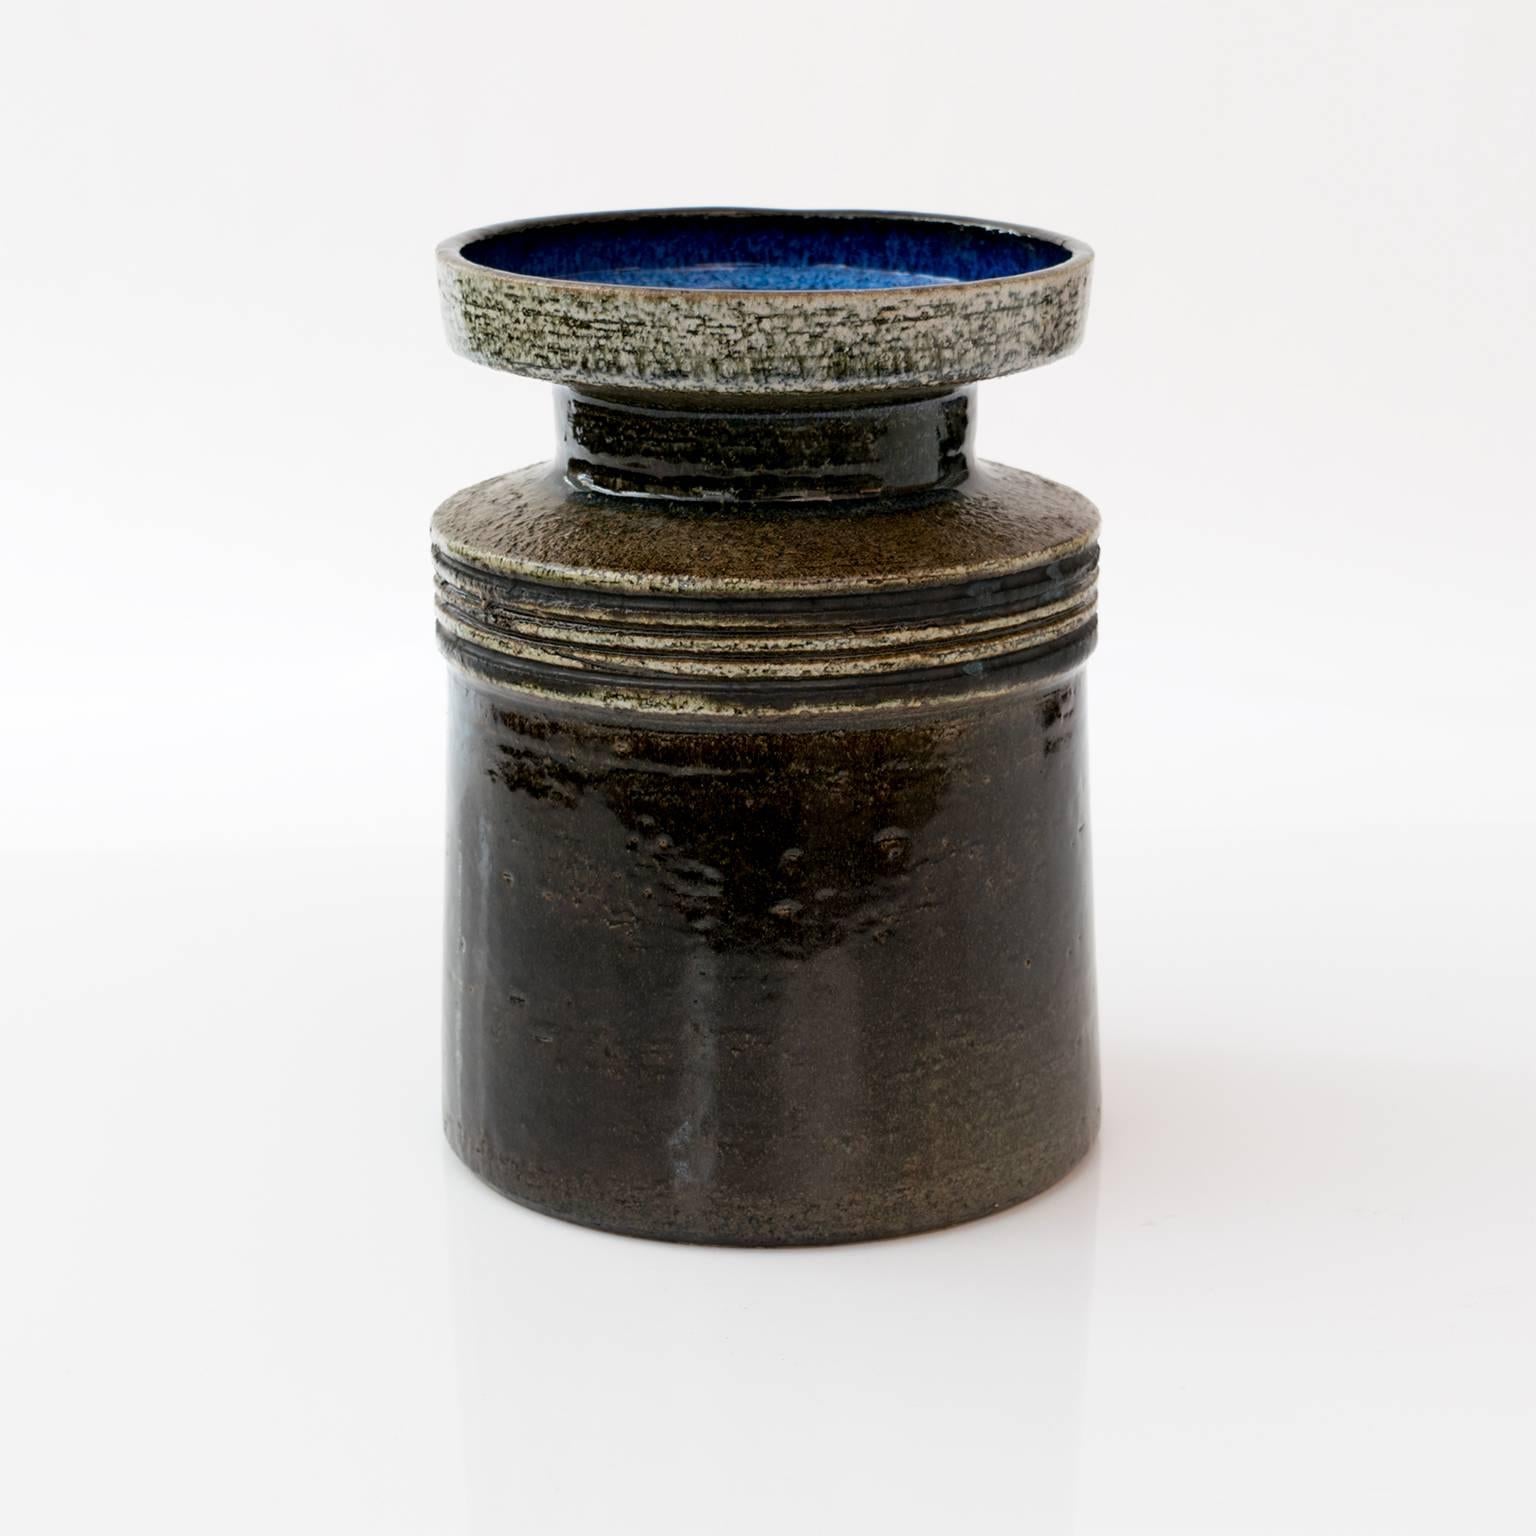 A Scandinavian modern vase by Britt-Louise Sundell for Gustavsberg, circa 1960. The vase has deep glaze over a textured surface and a shiny blue glaze inside.
 
Measures: Height 9